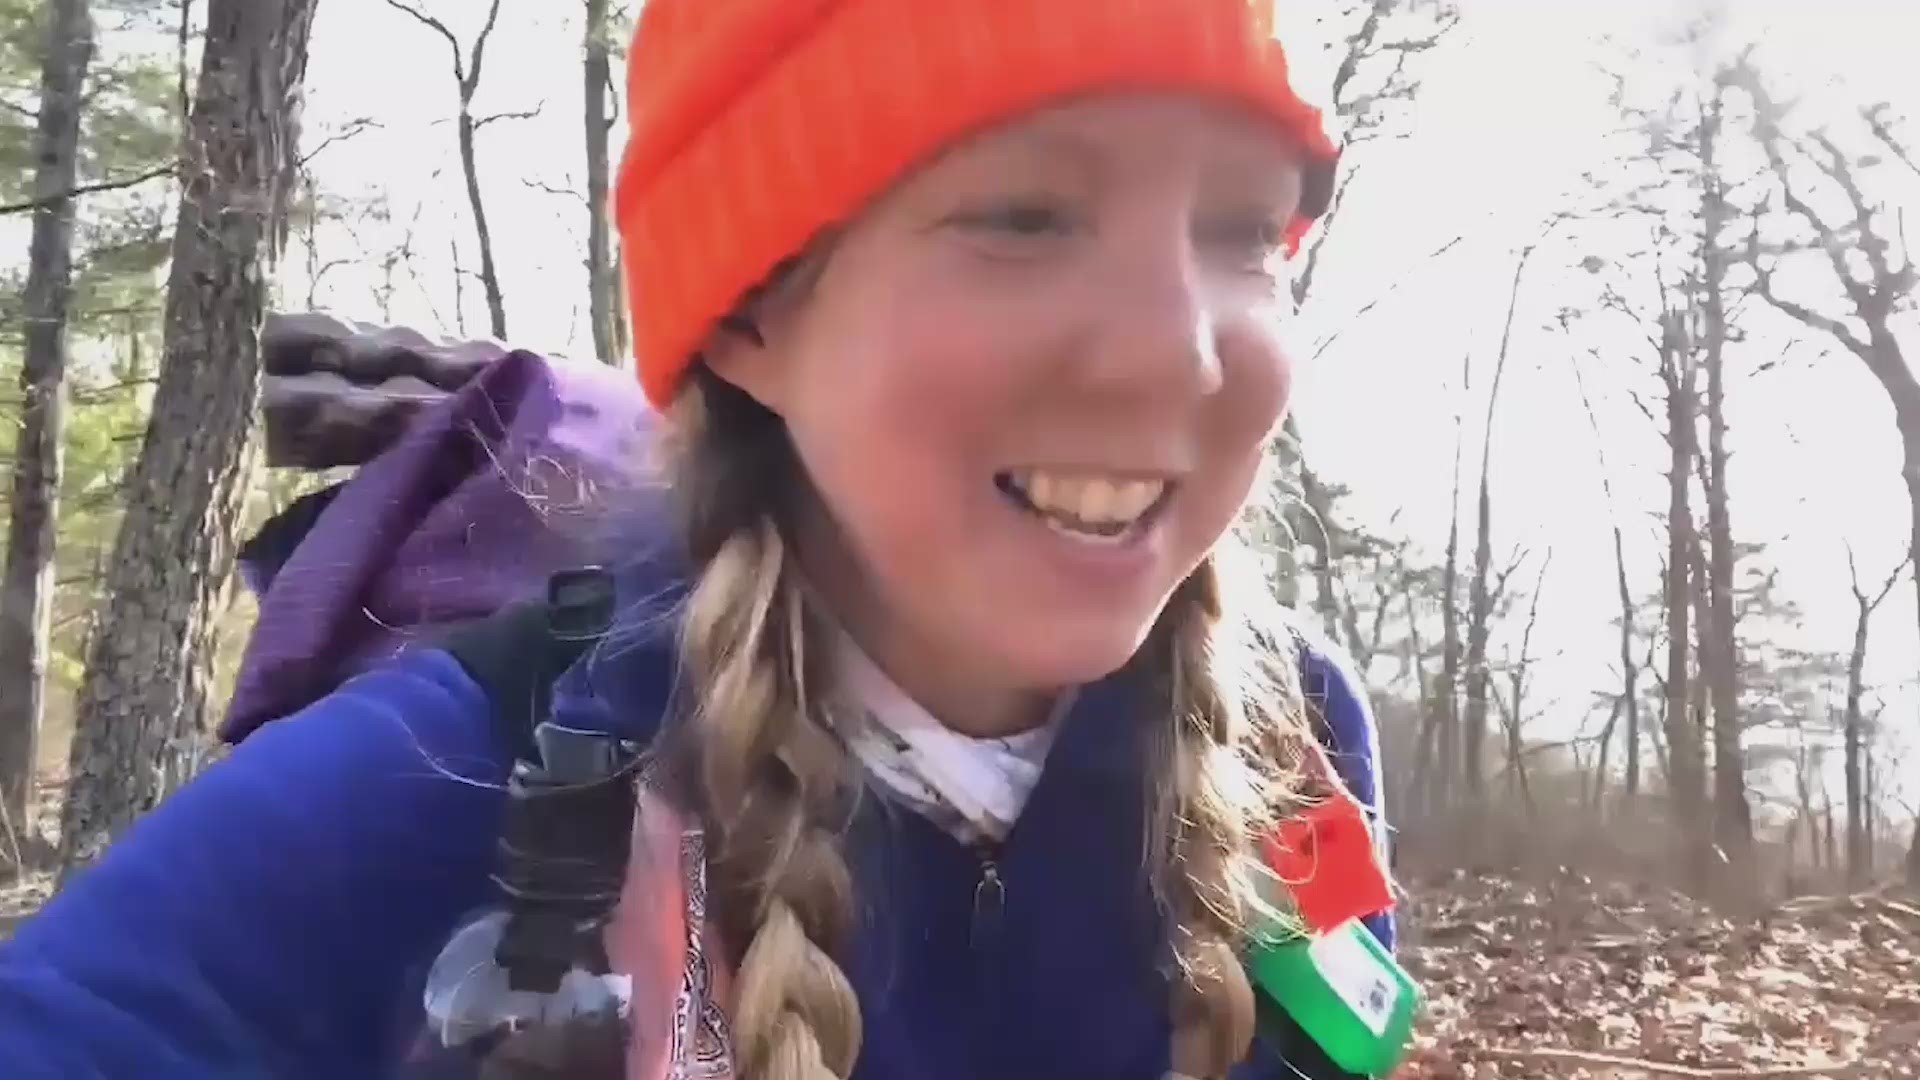 Less than 180 miles stretch between Gretchen Pardon and the end of her Appalachian Trail thru-hike.